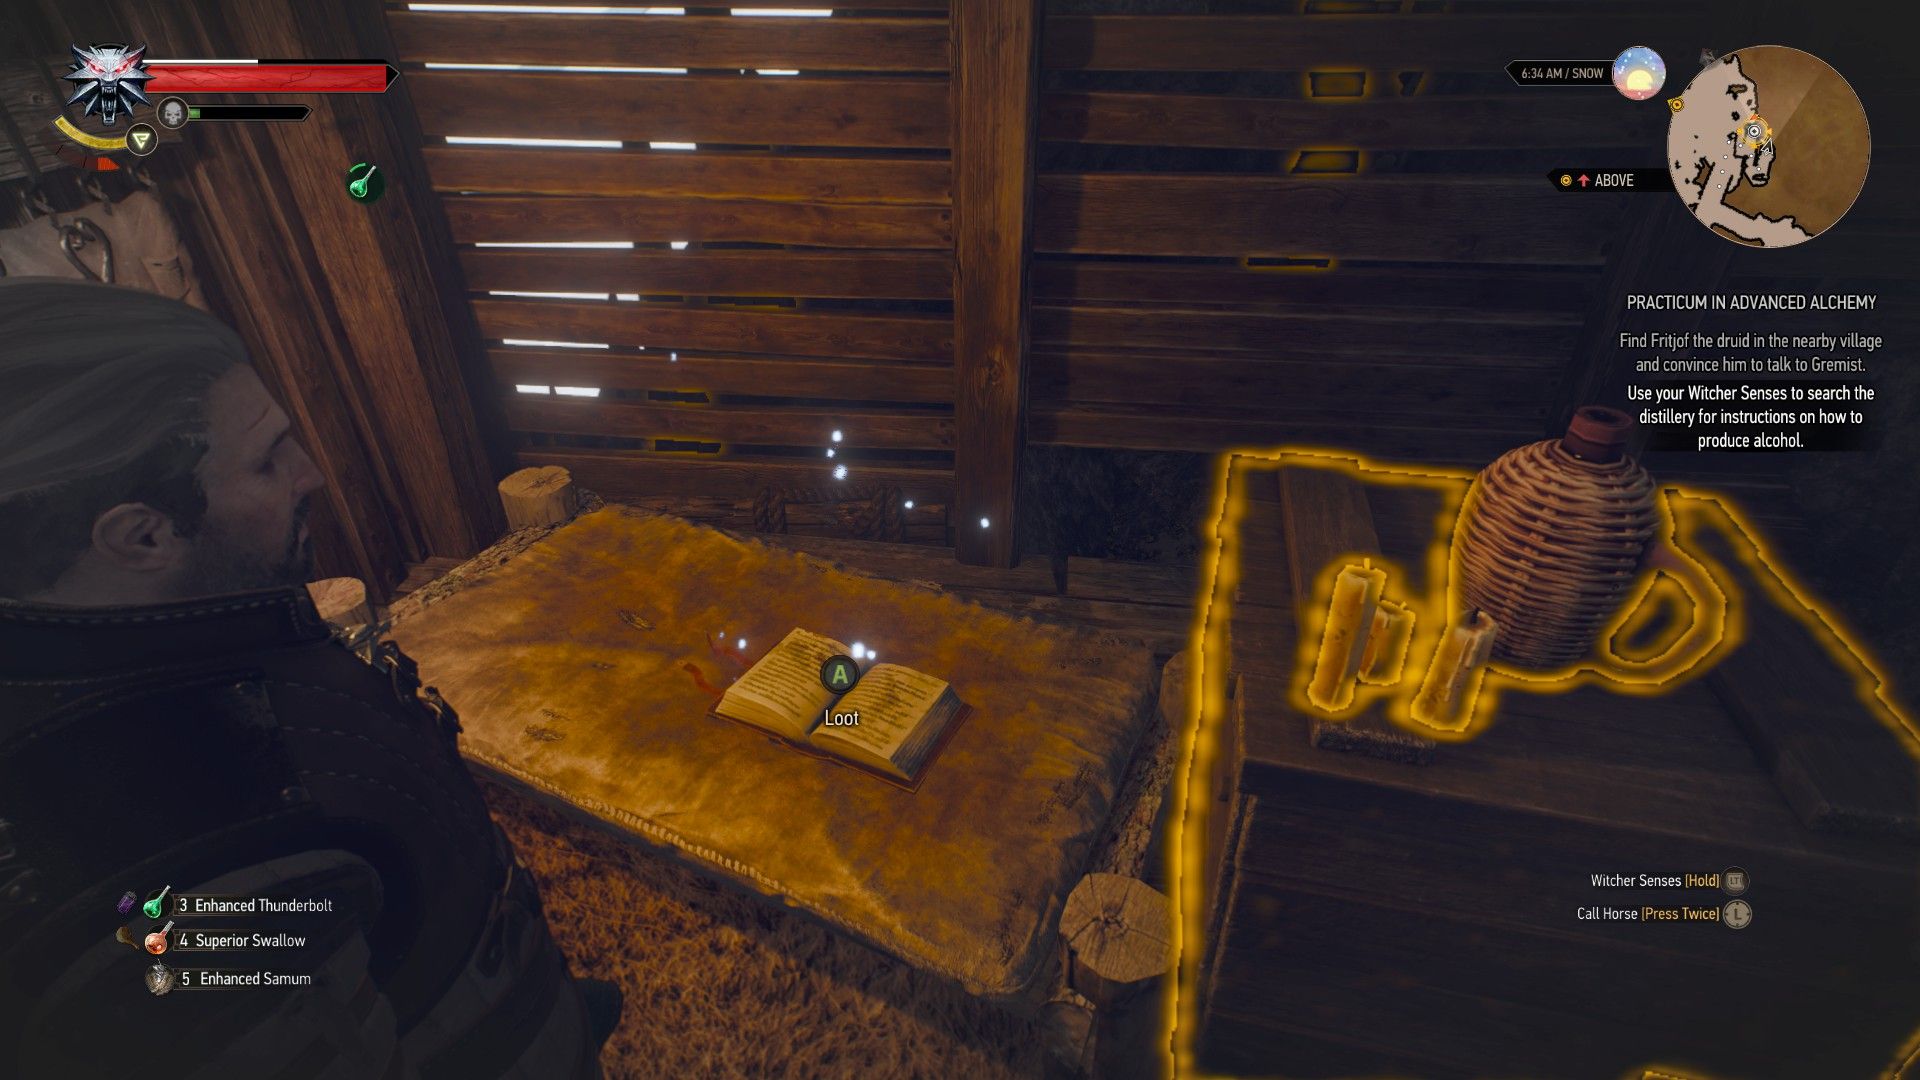 Screenshot of Geralt standing in an abandoned room with a book on the bed.